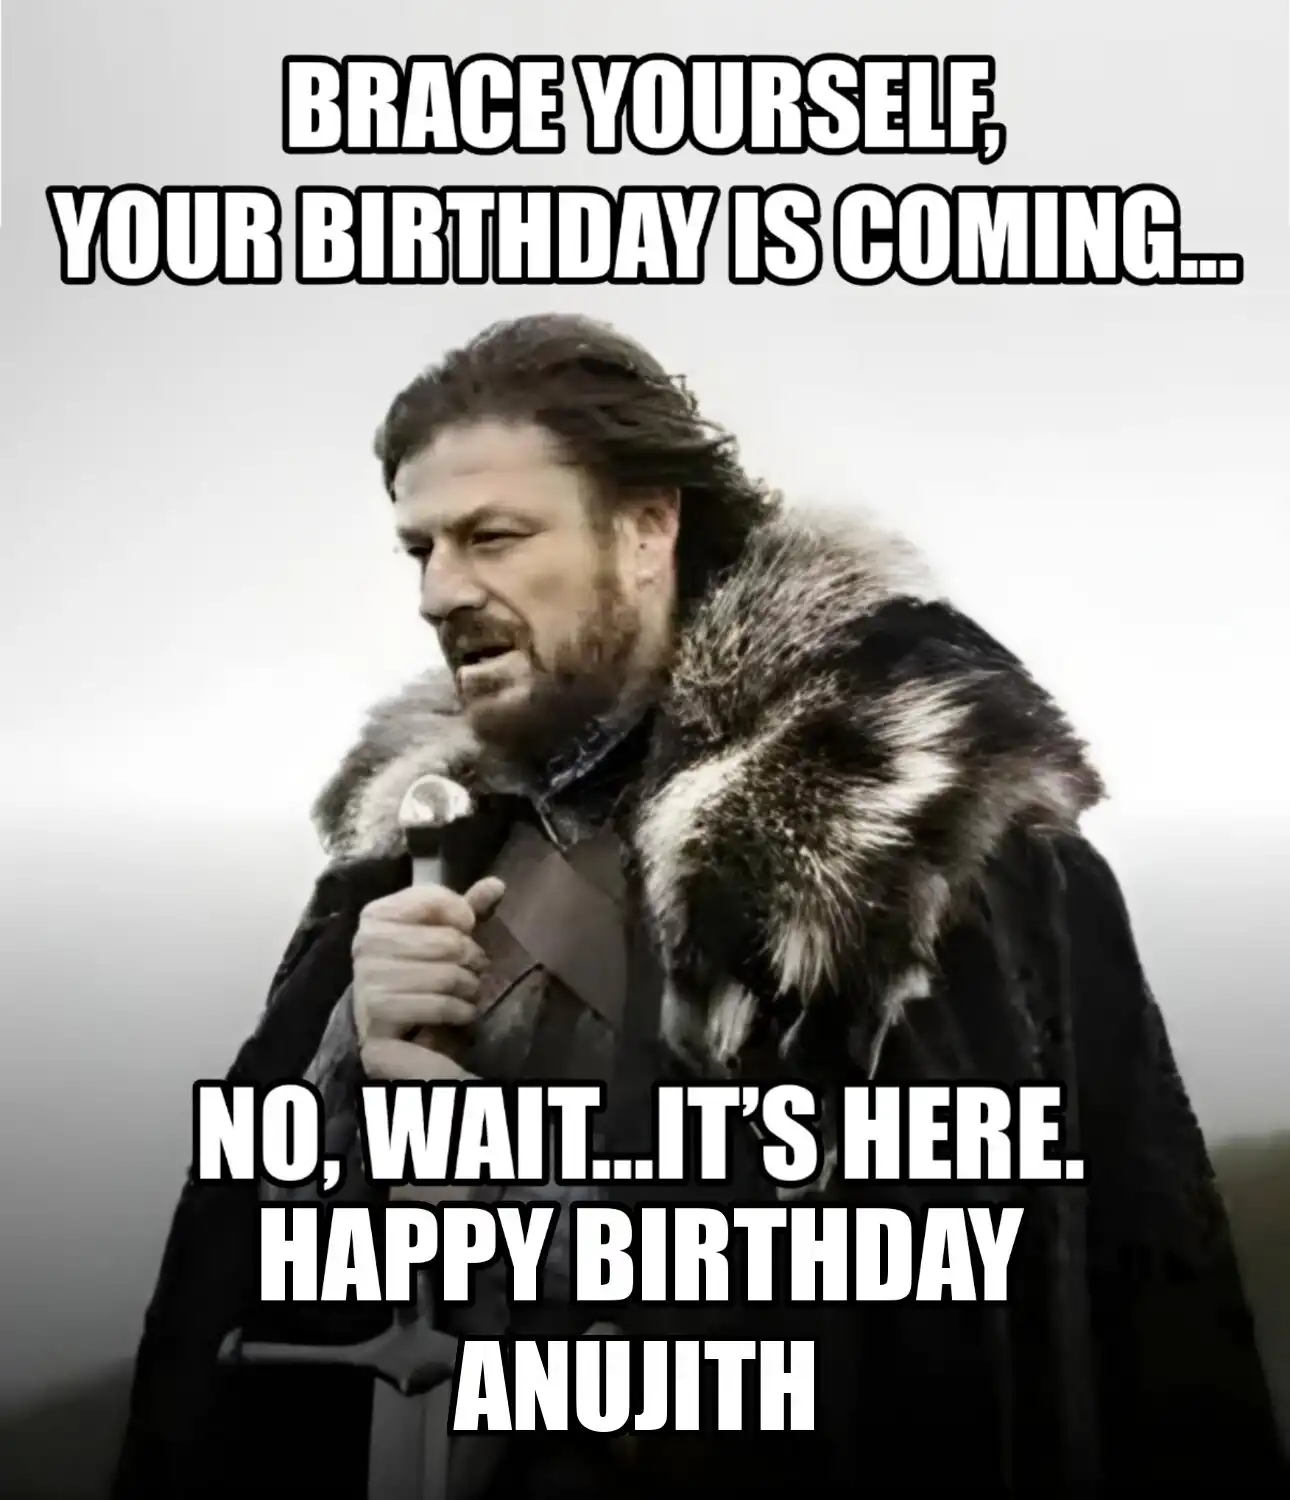 Happy Birthday Anujith Brace Yourself Your Birthday Is Coming Meme